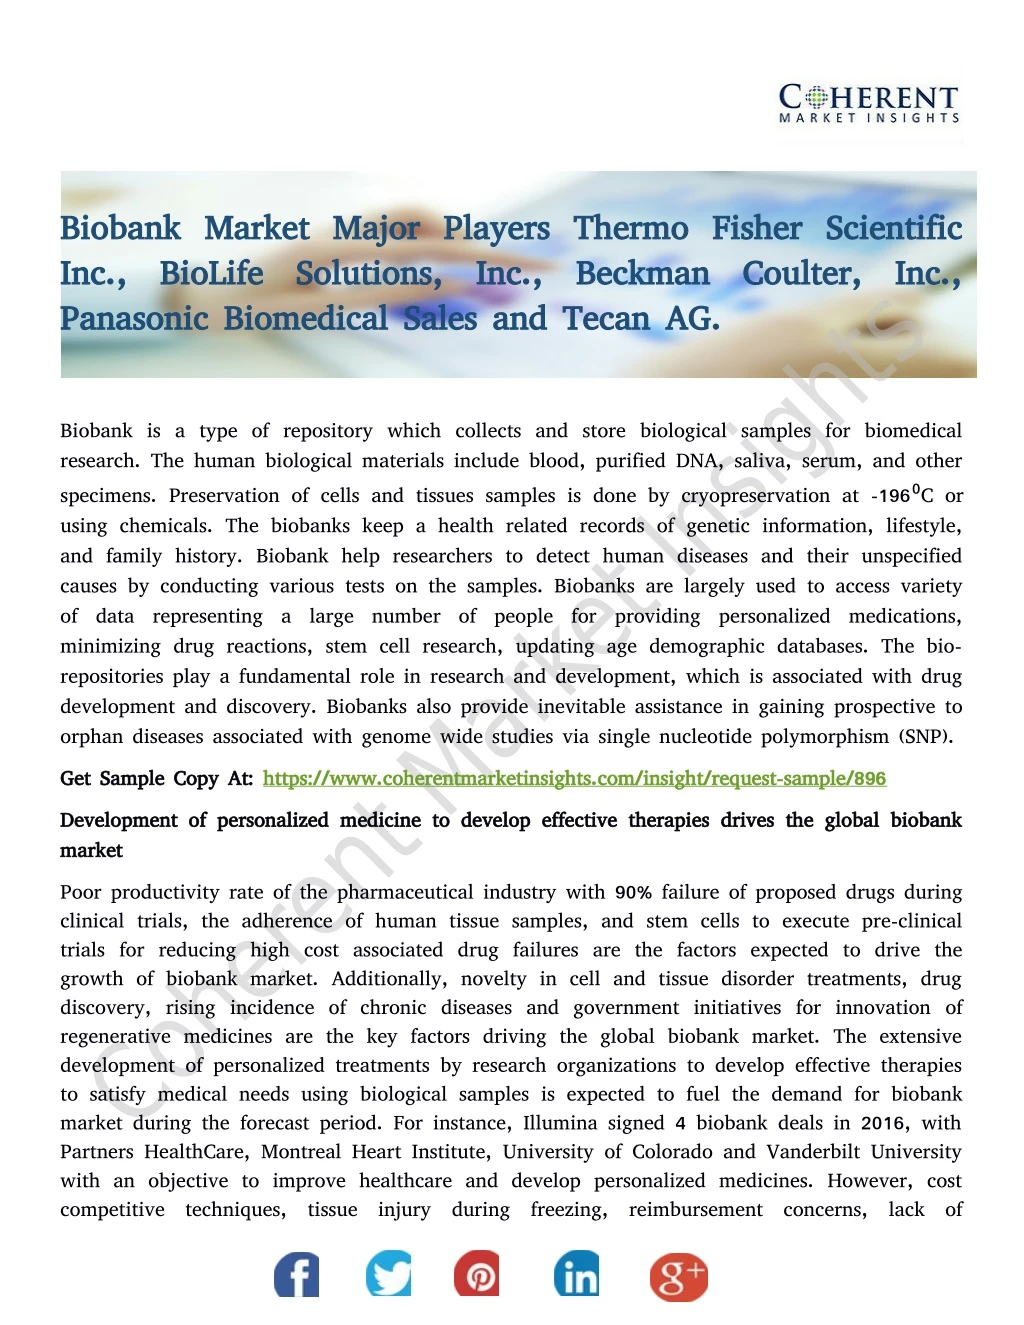 biobank market major players thermo fisher